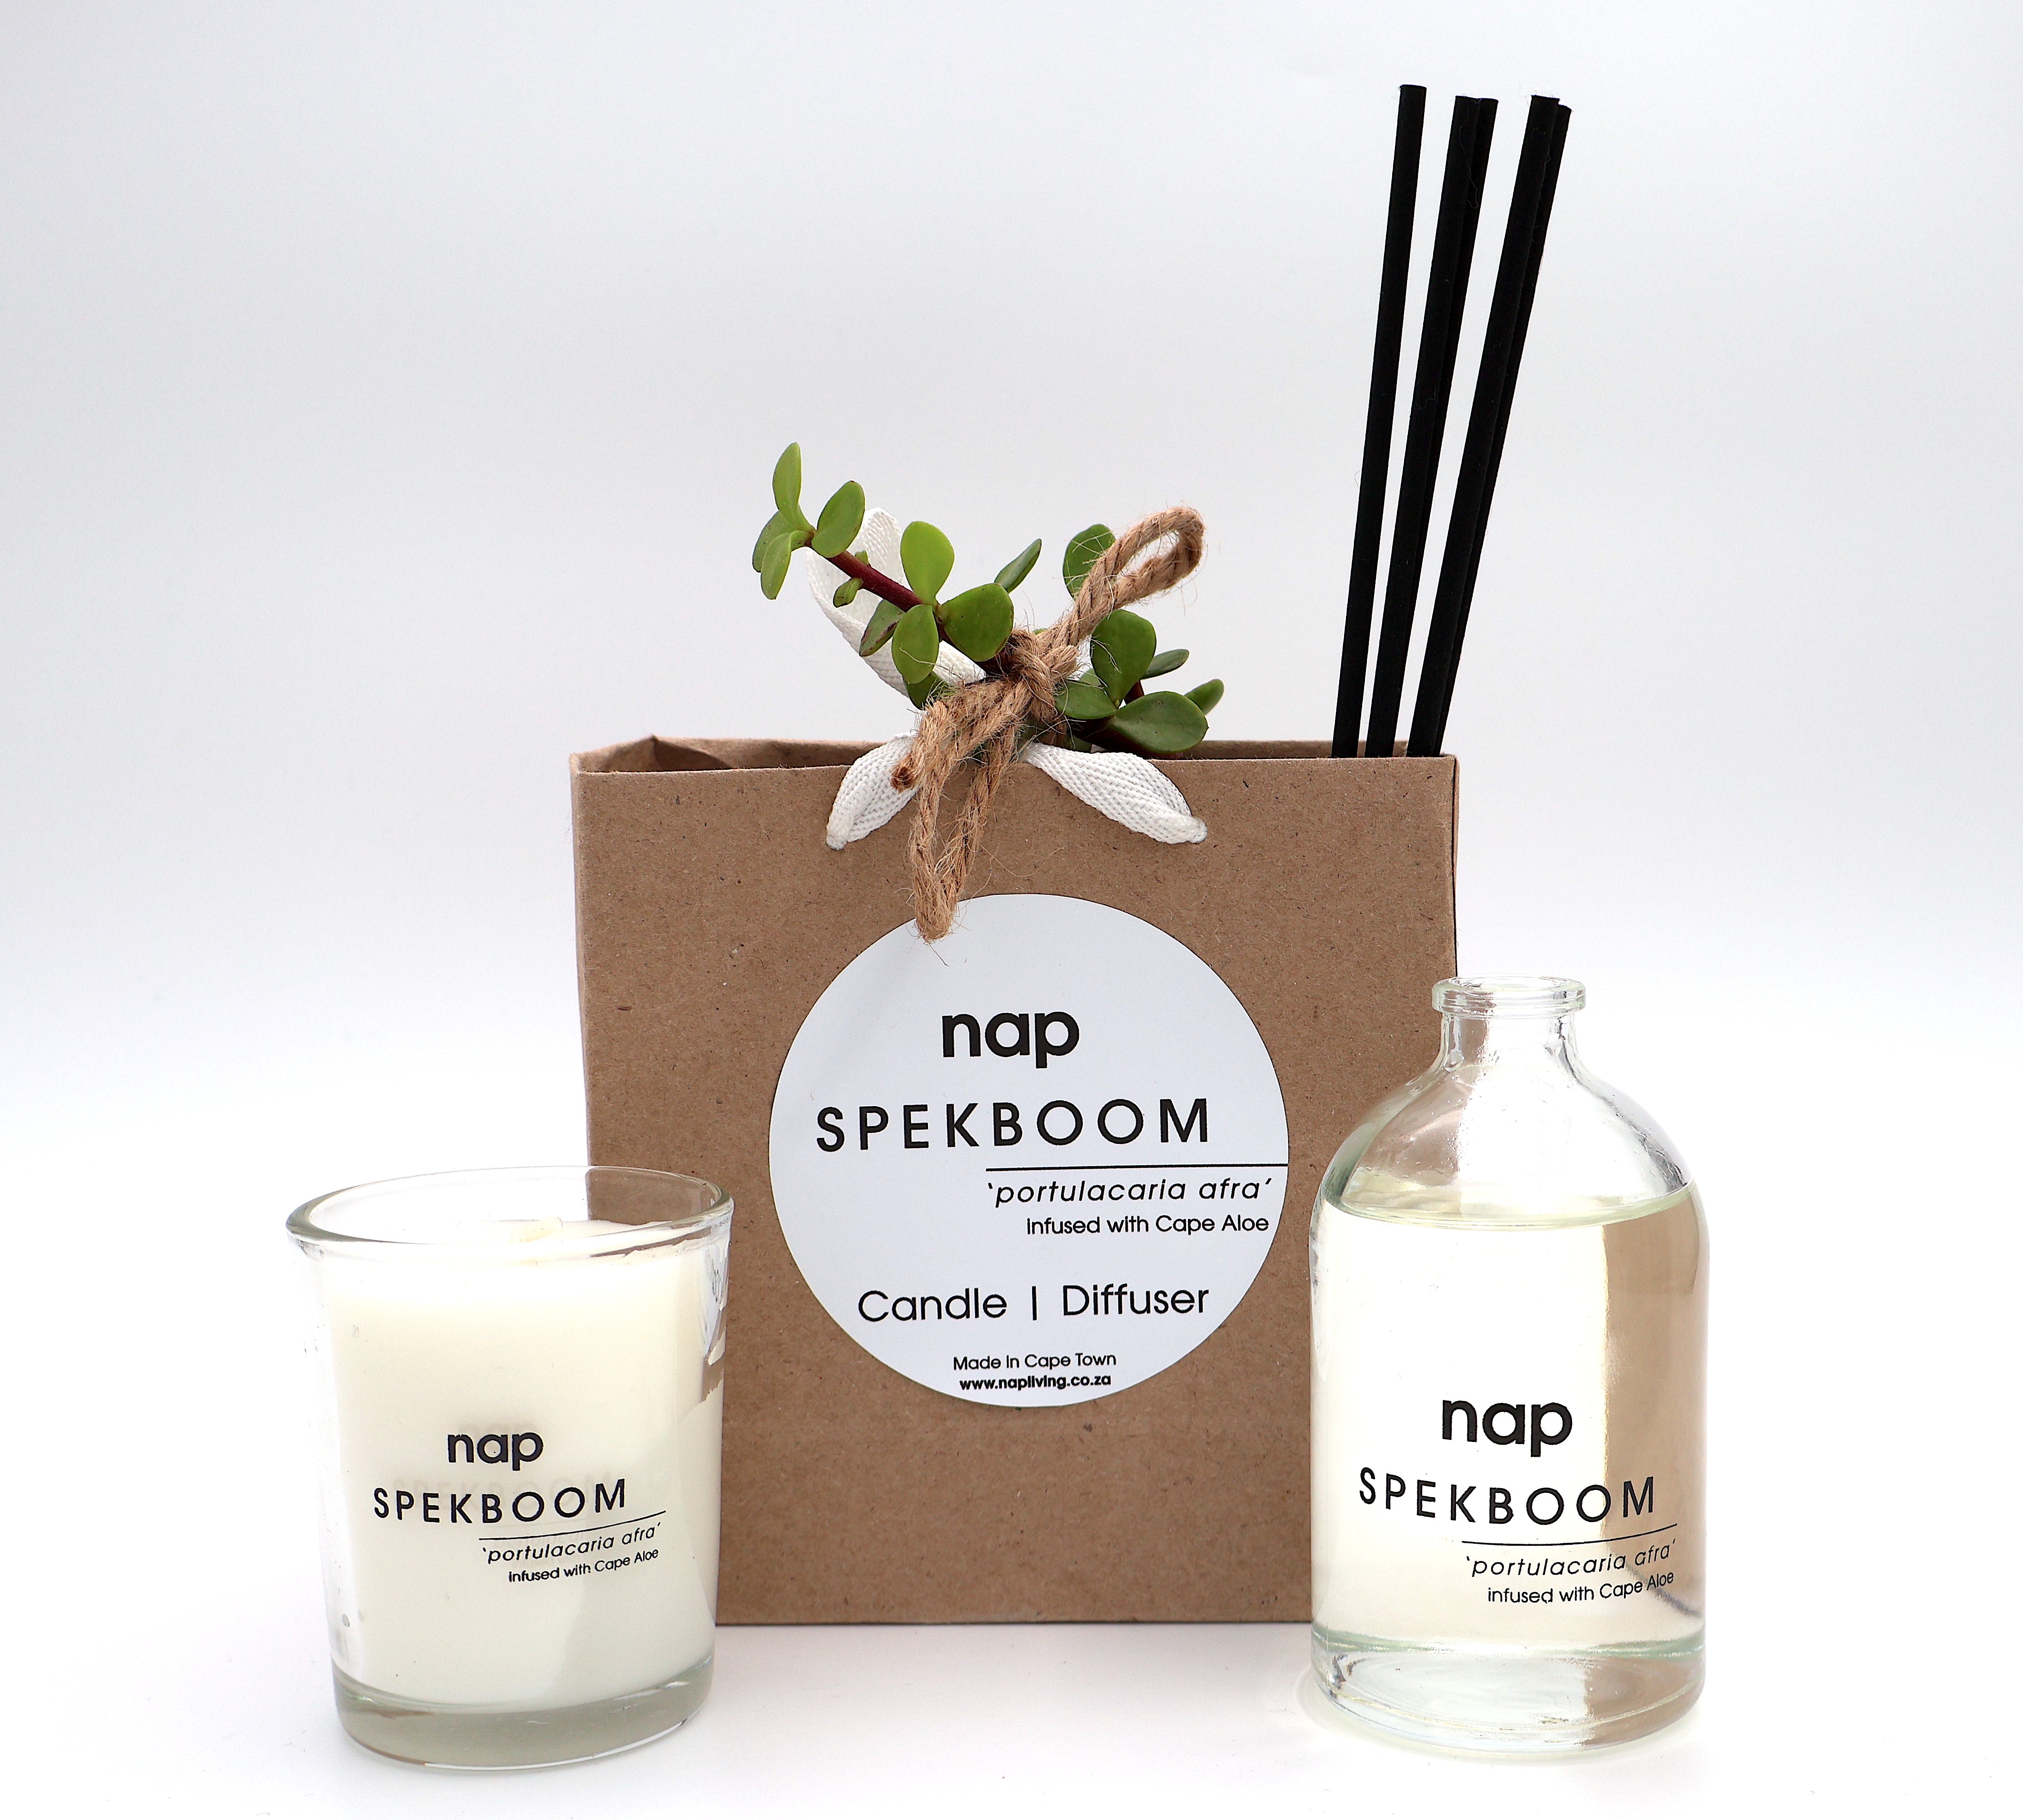 SPEKBOOM CANDLE AND DIFFUSER GIFT SET